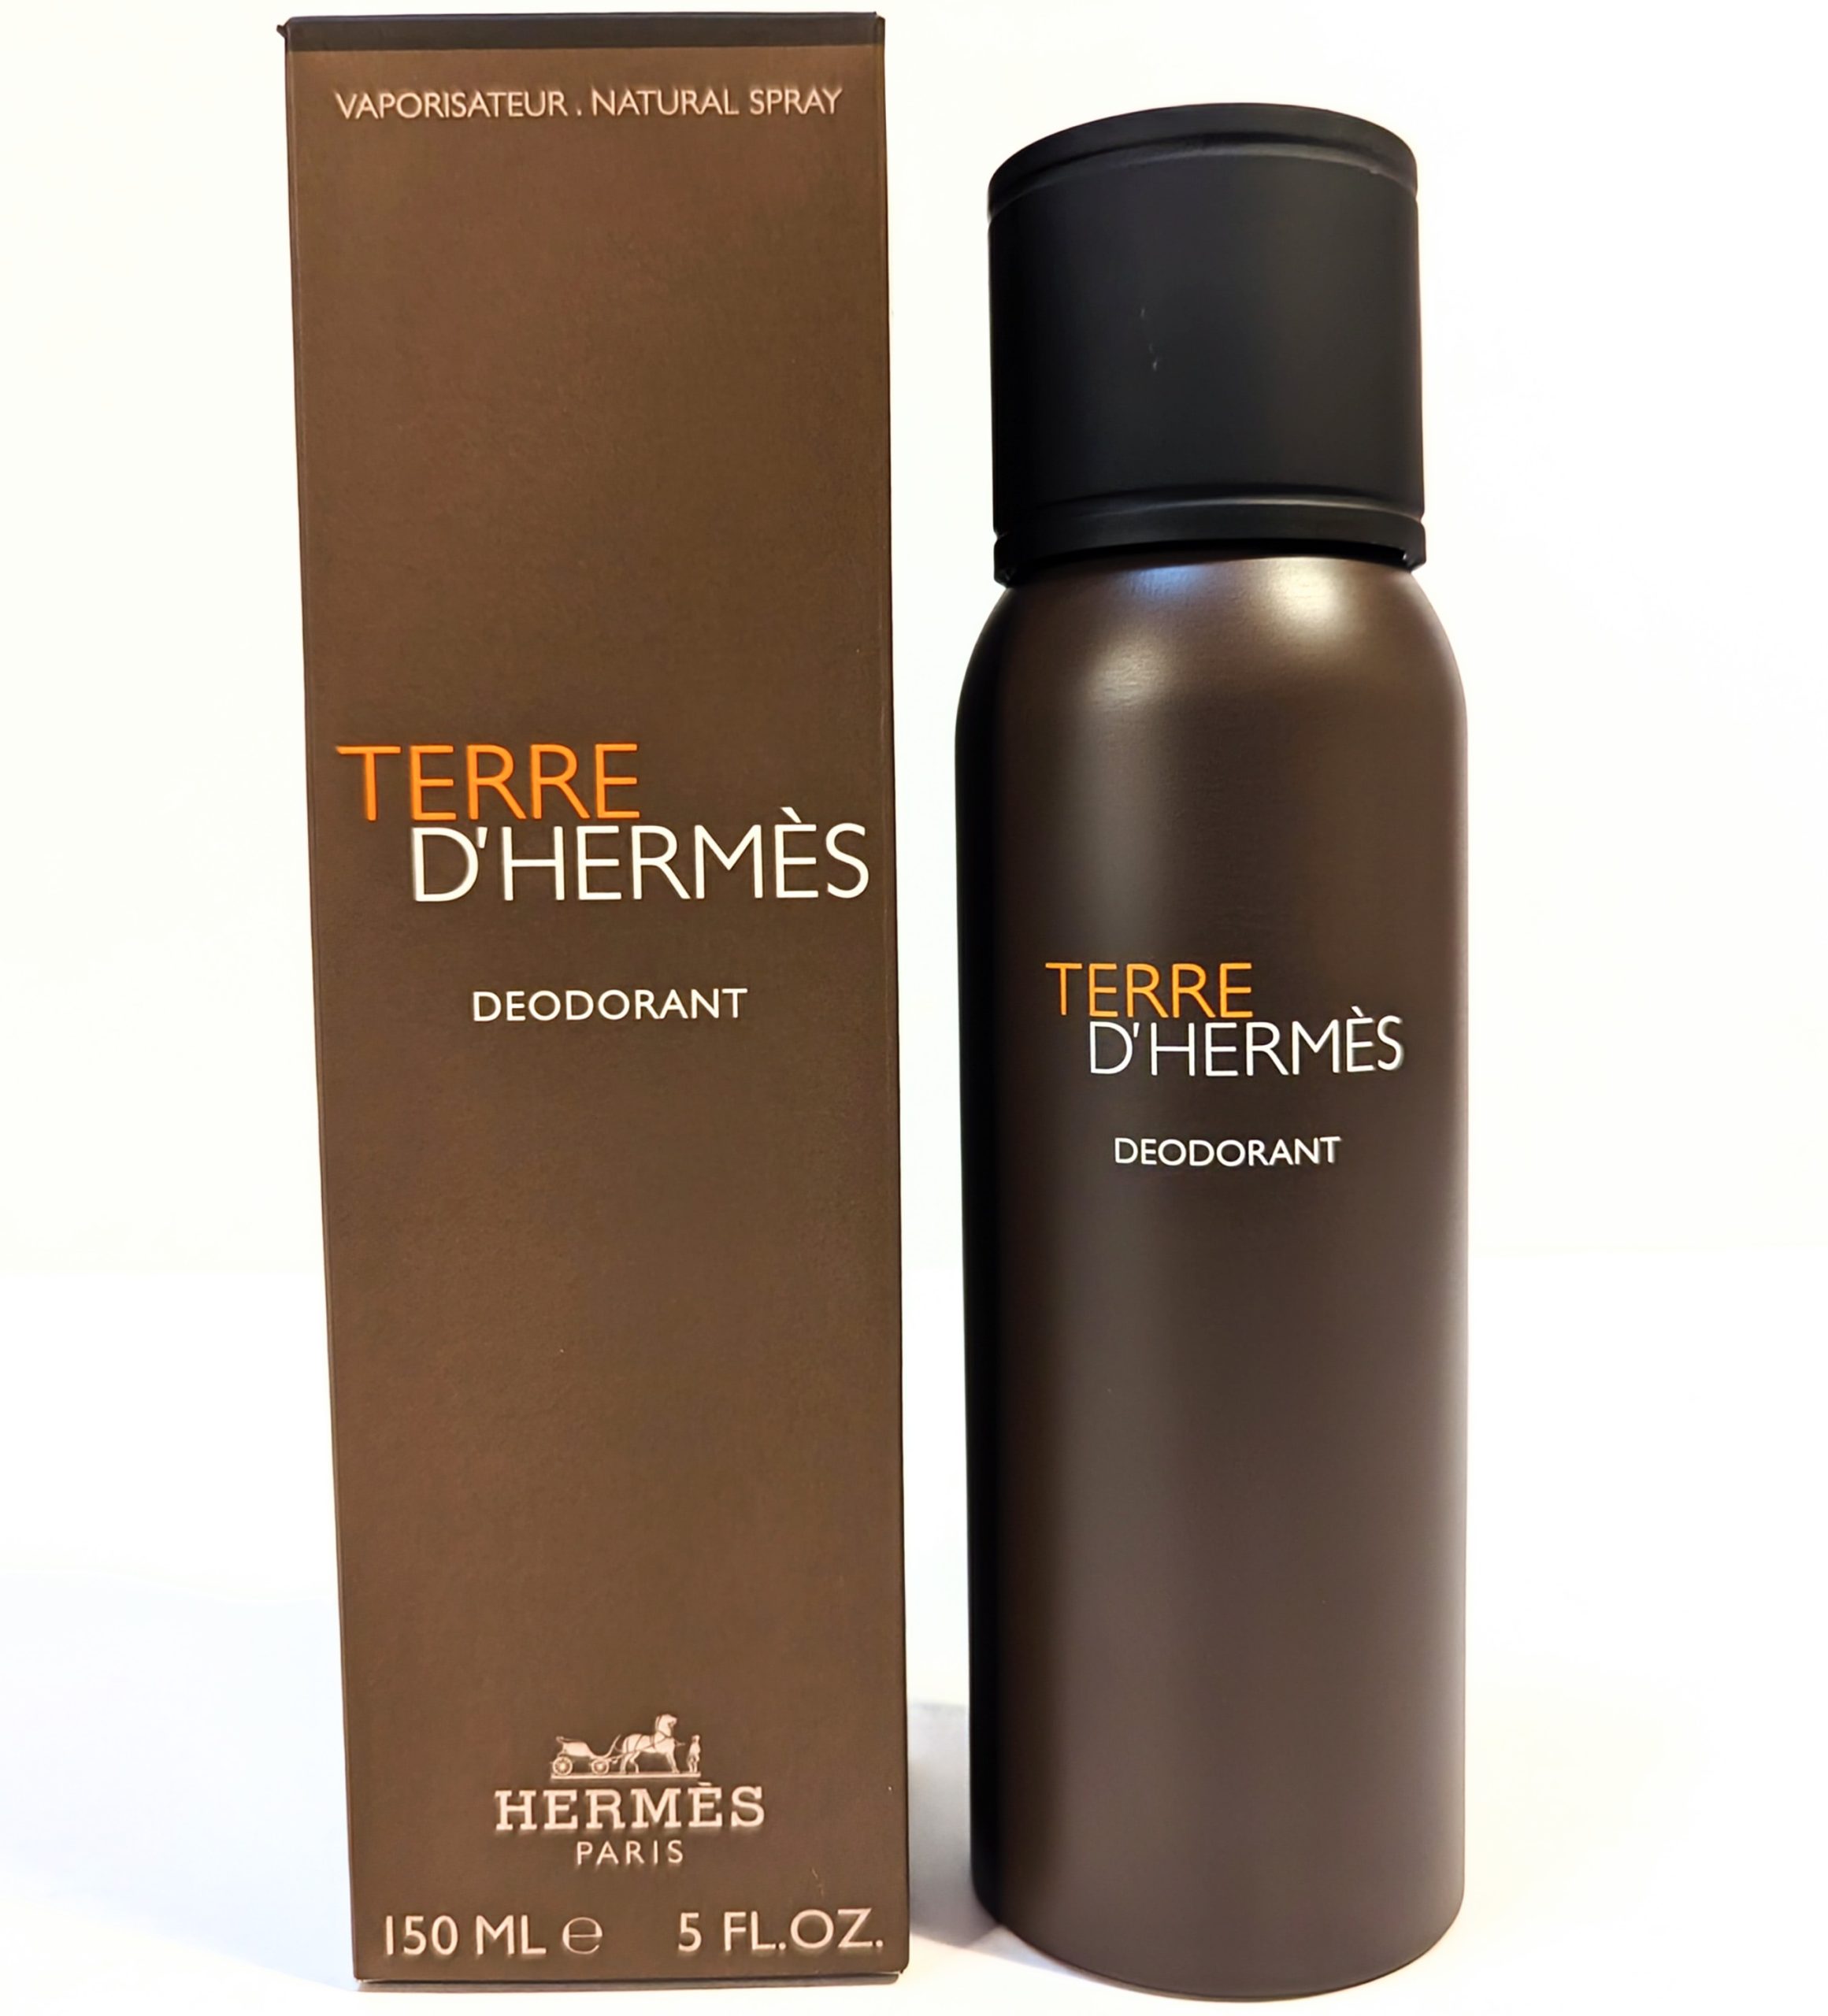 Image of Terre D’Hermes deodorant spray bottle next to its box. The bottle and box are brown with text indicating 150 ml or 5 fl.oz.